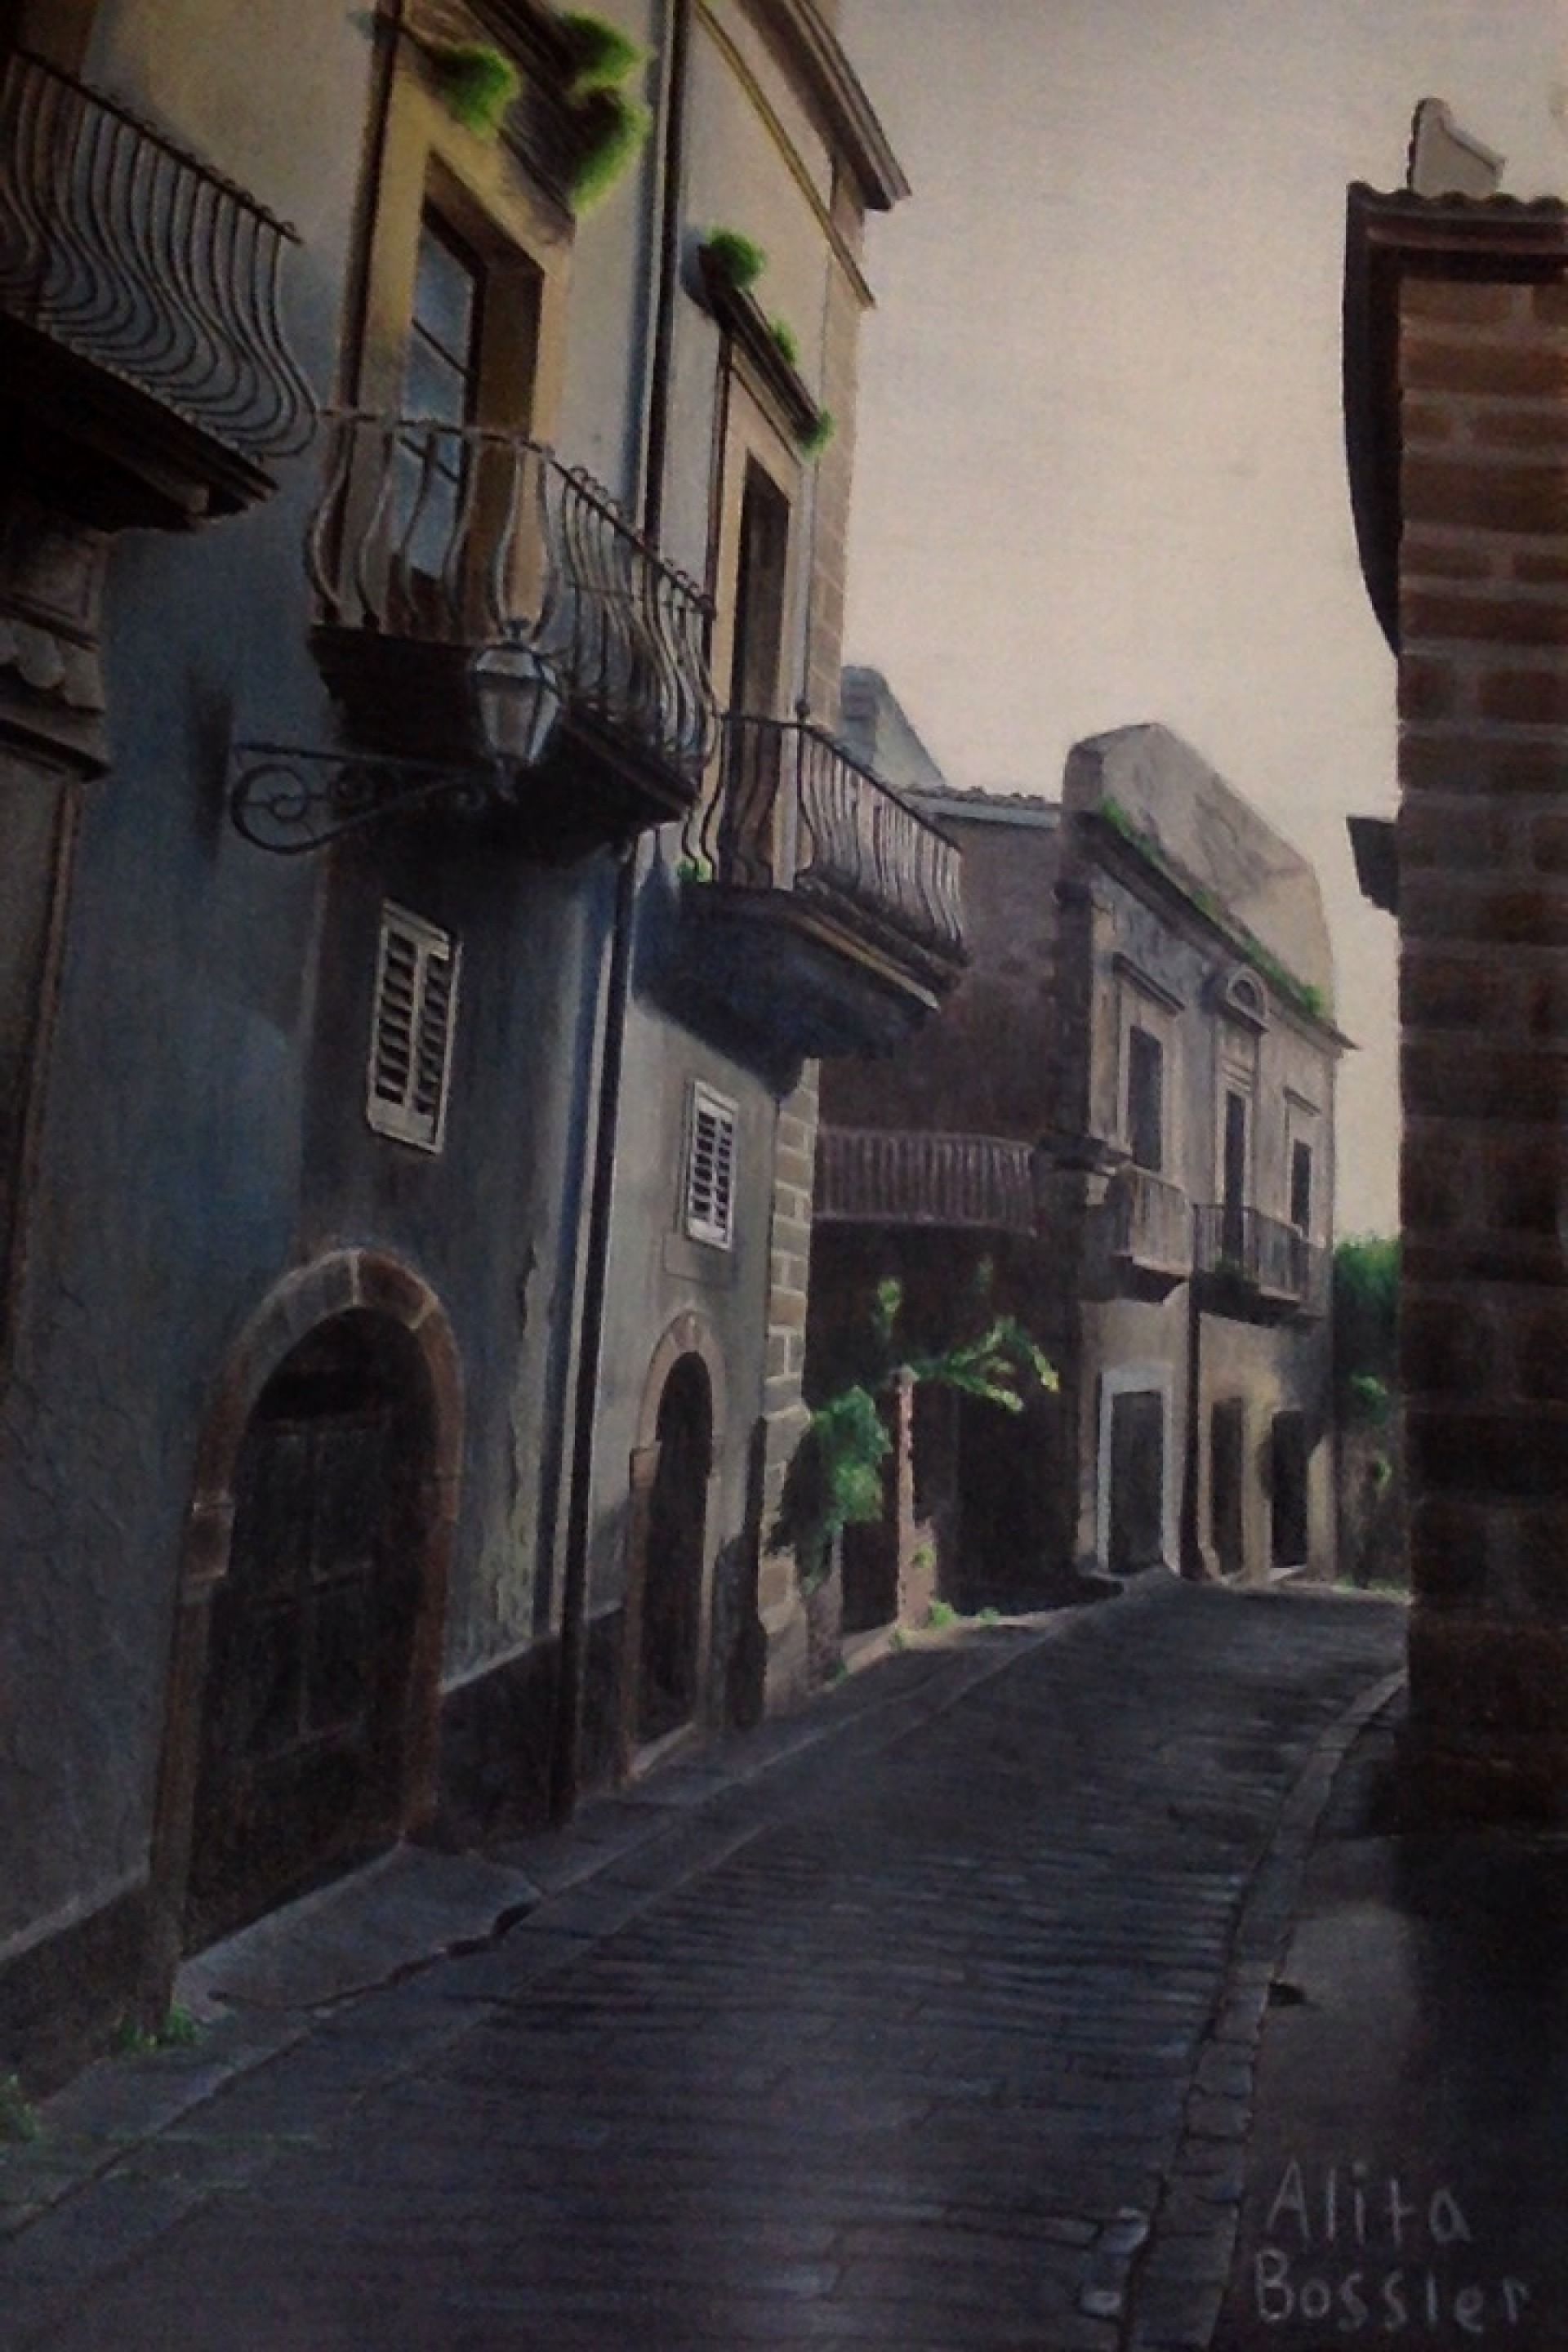 Alita's colored pencil work of buildings in a city